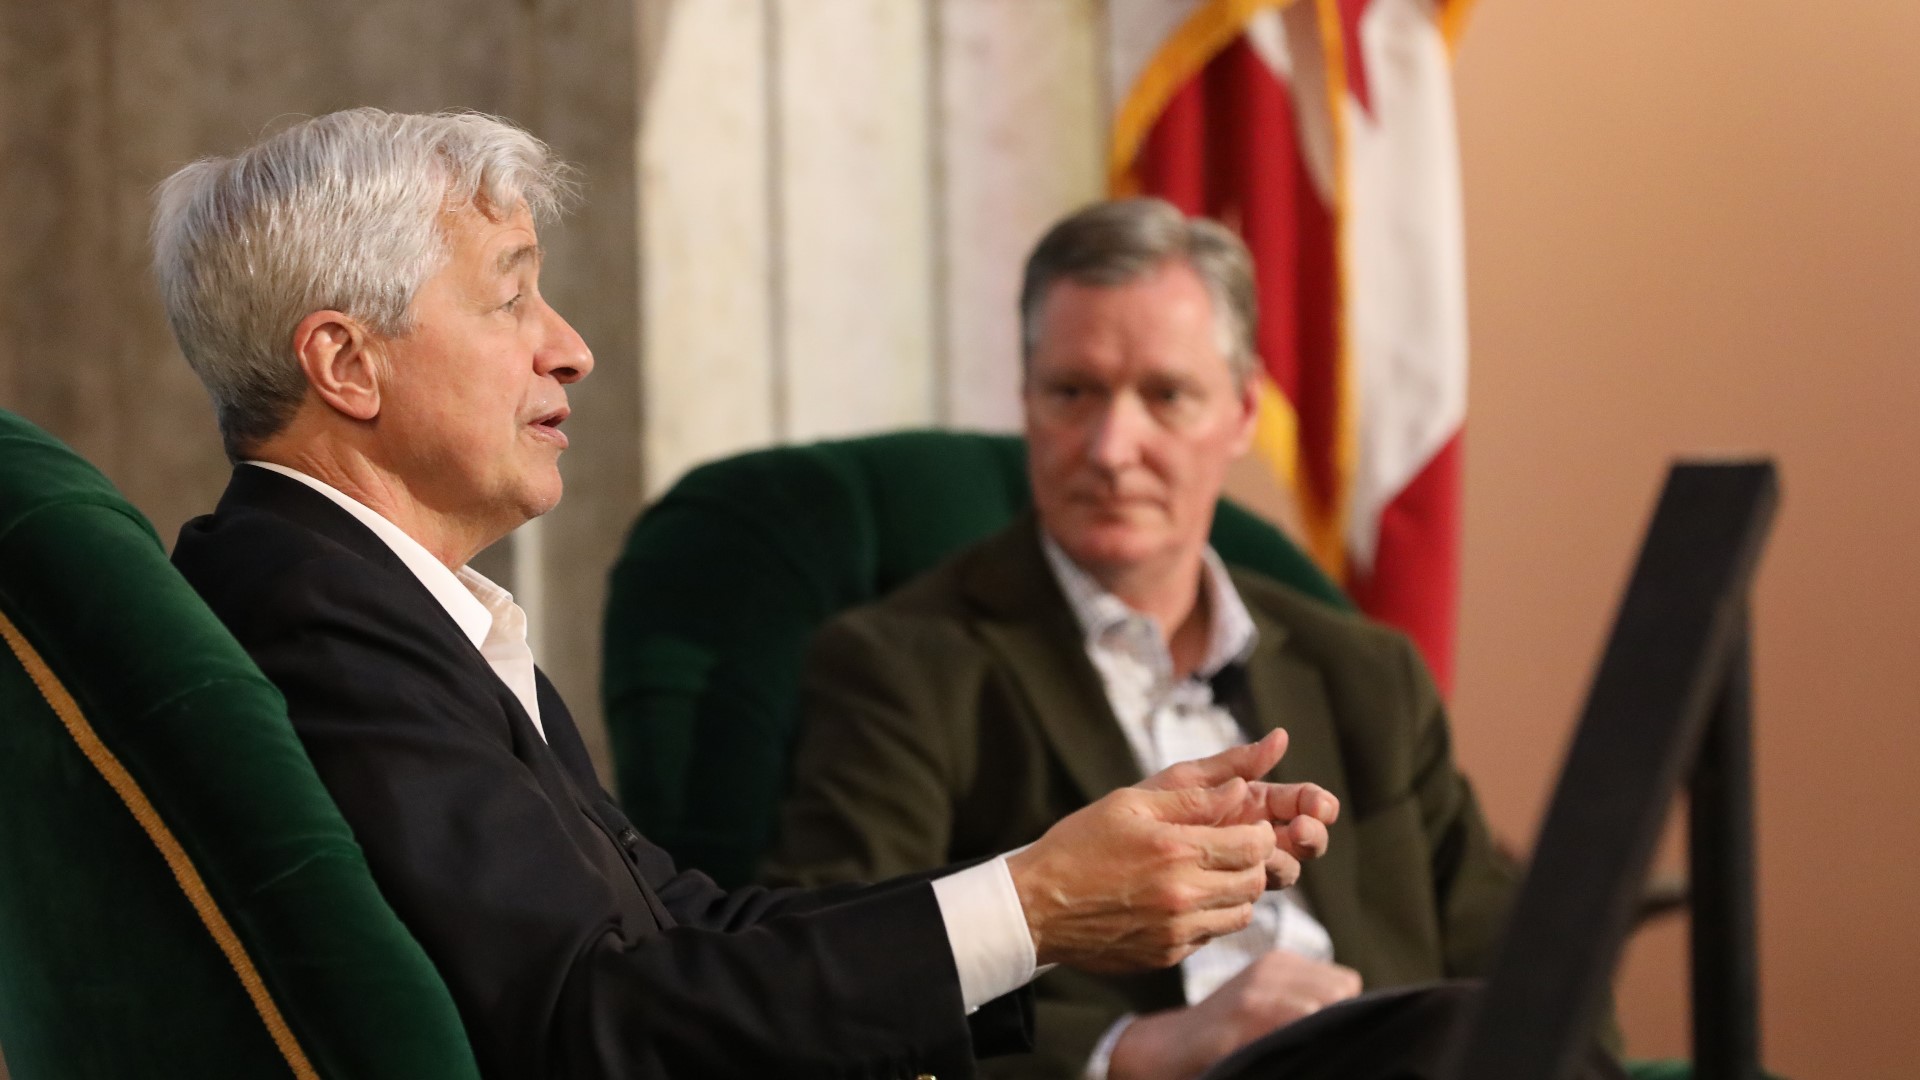 10TV was the only TV station in Columbus to do a sit-down interview with Dimon. You can see part of that interview Wednesday on Wake Up CBUS starting at 6 a.m.